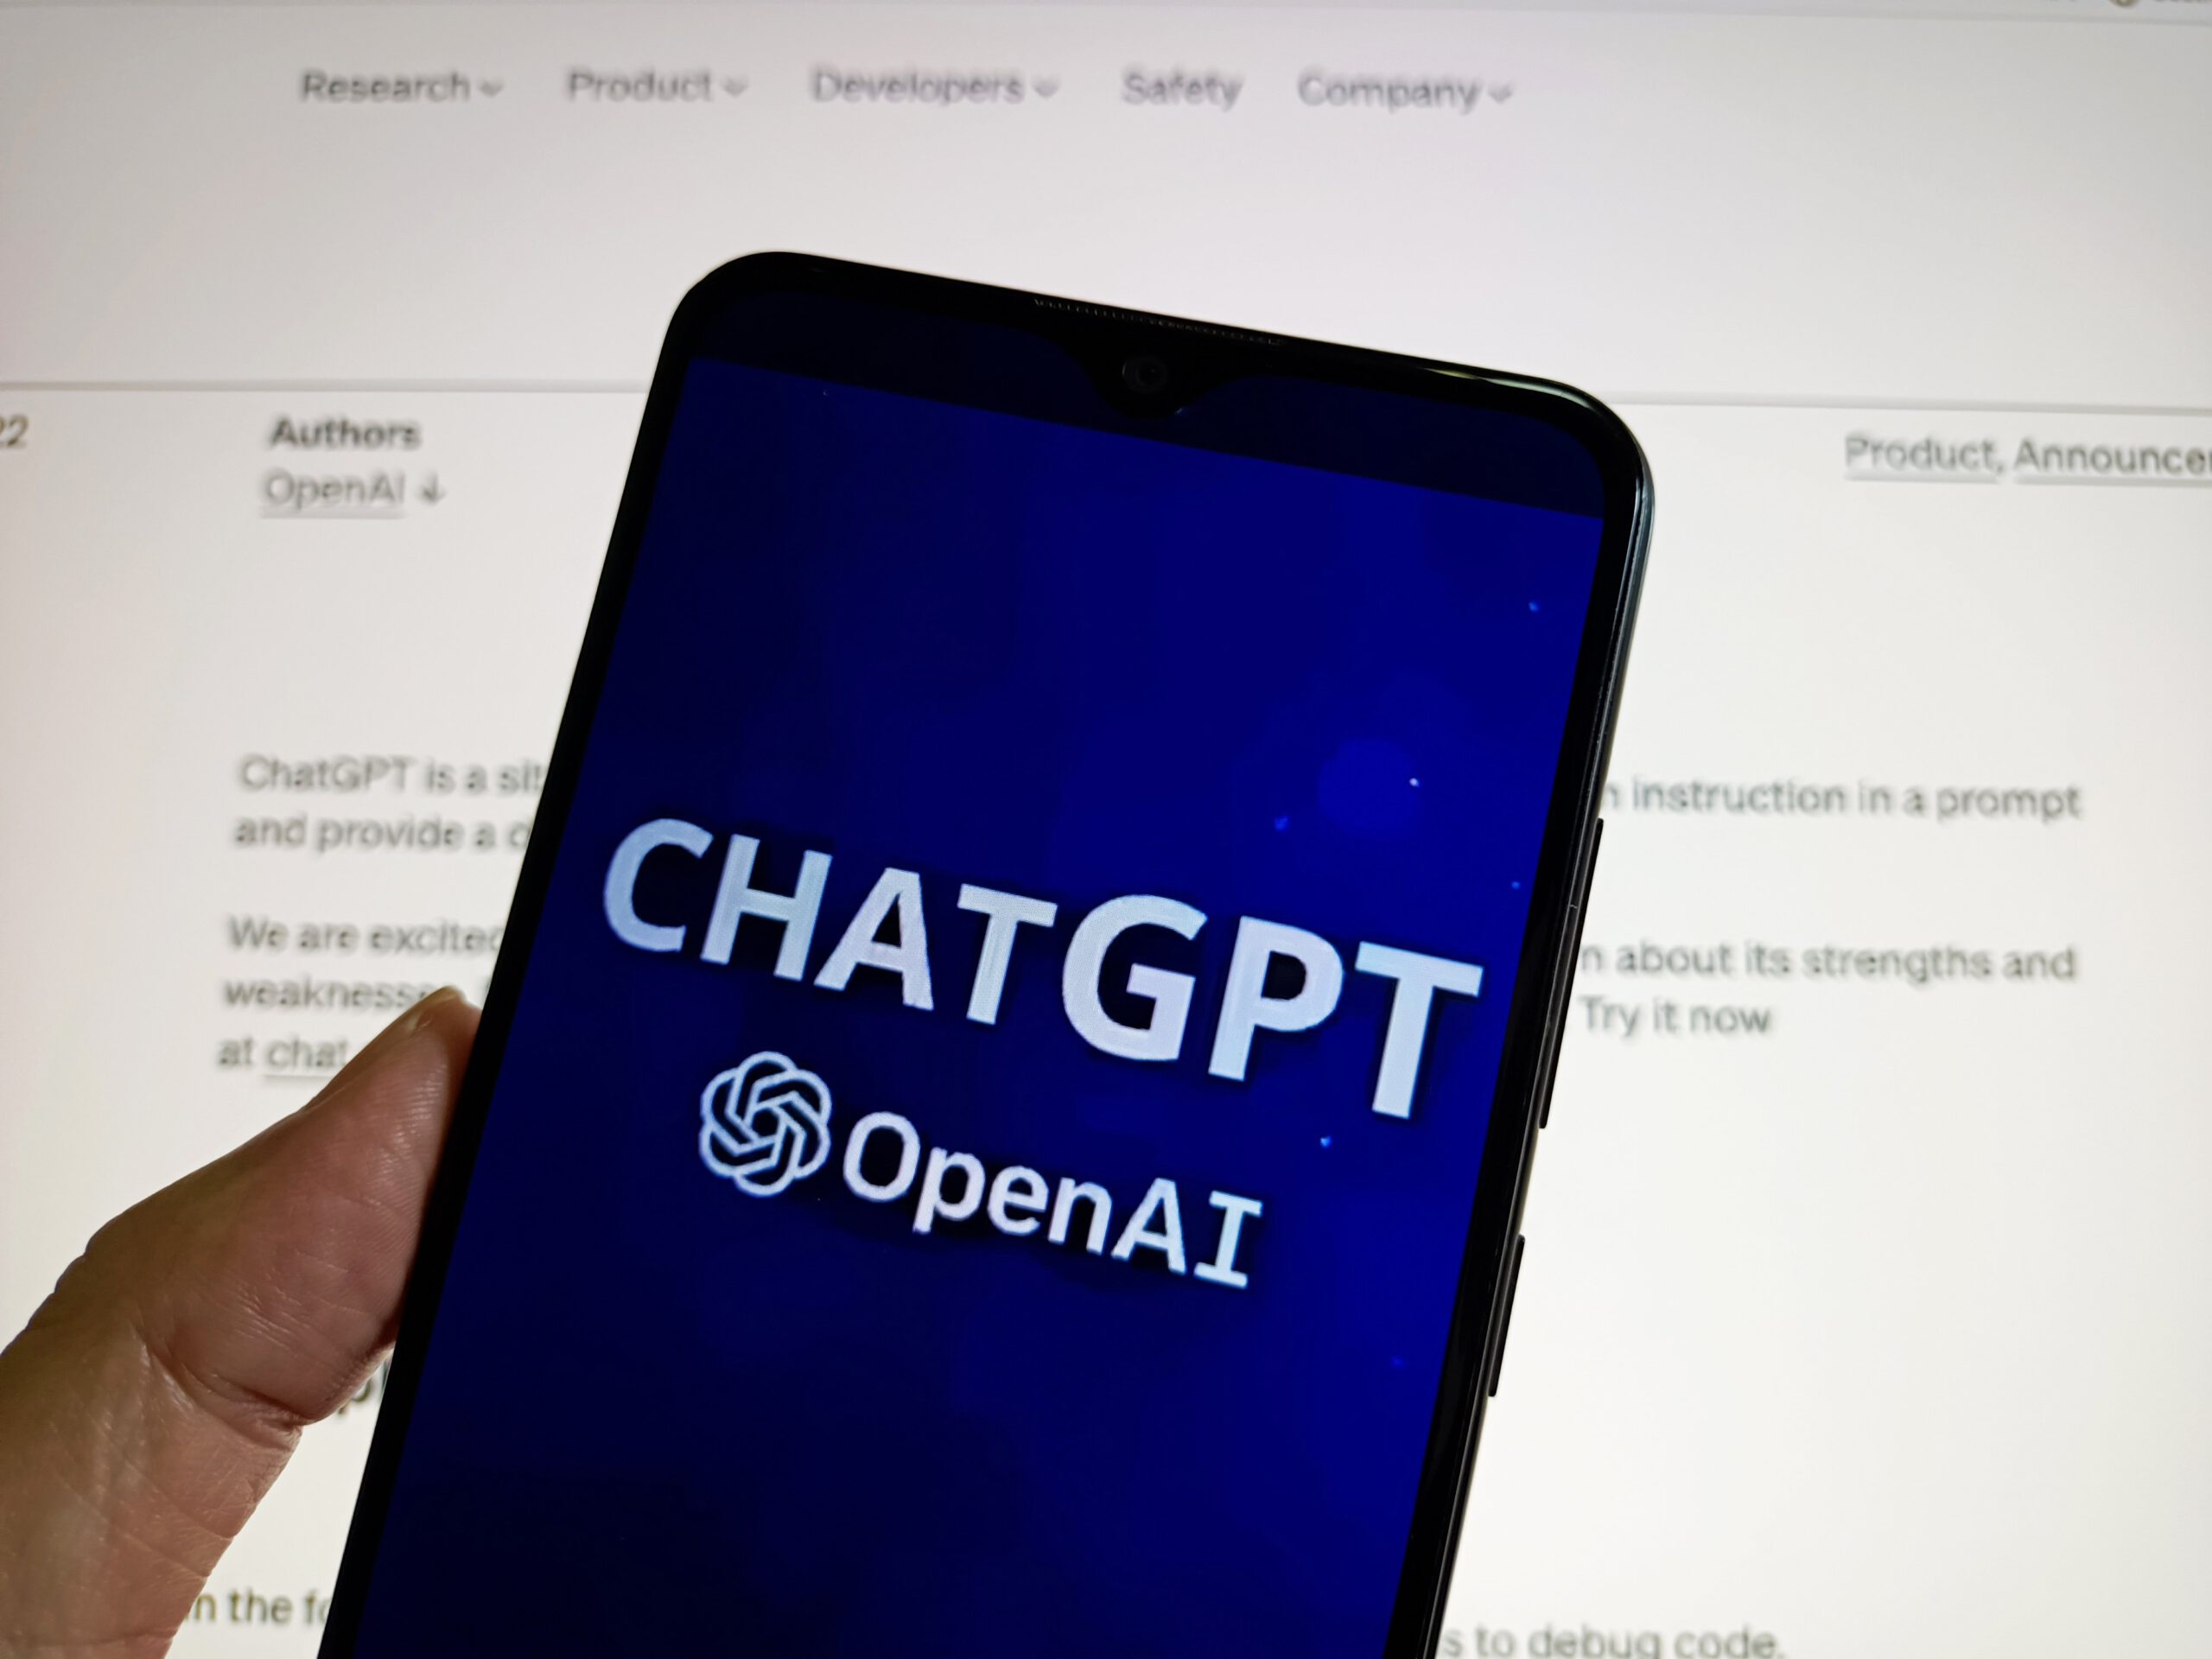 a phone with the ChatGPT logo and a screen with some text in the background